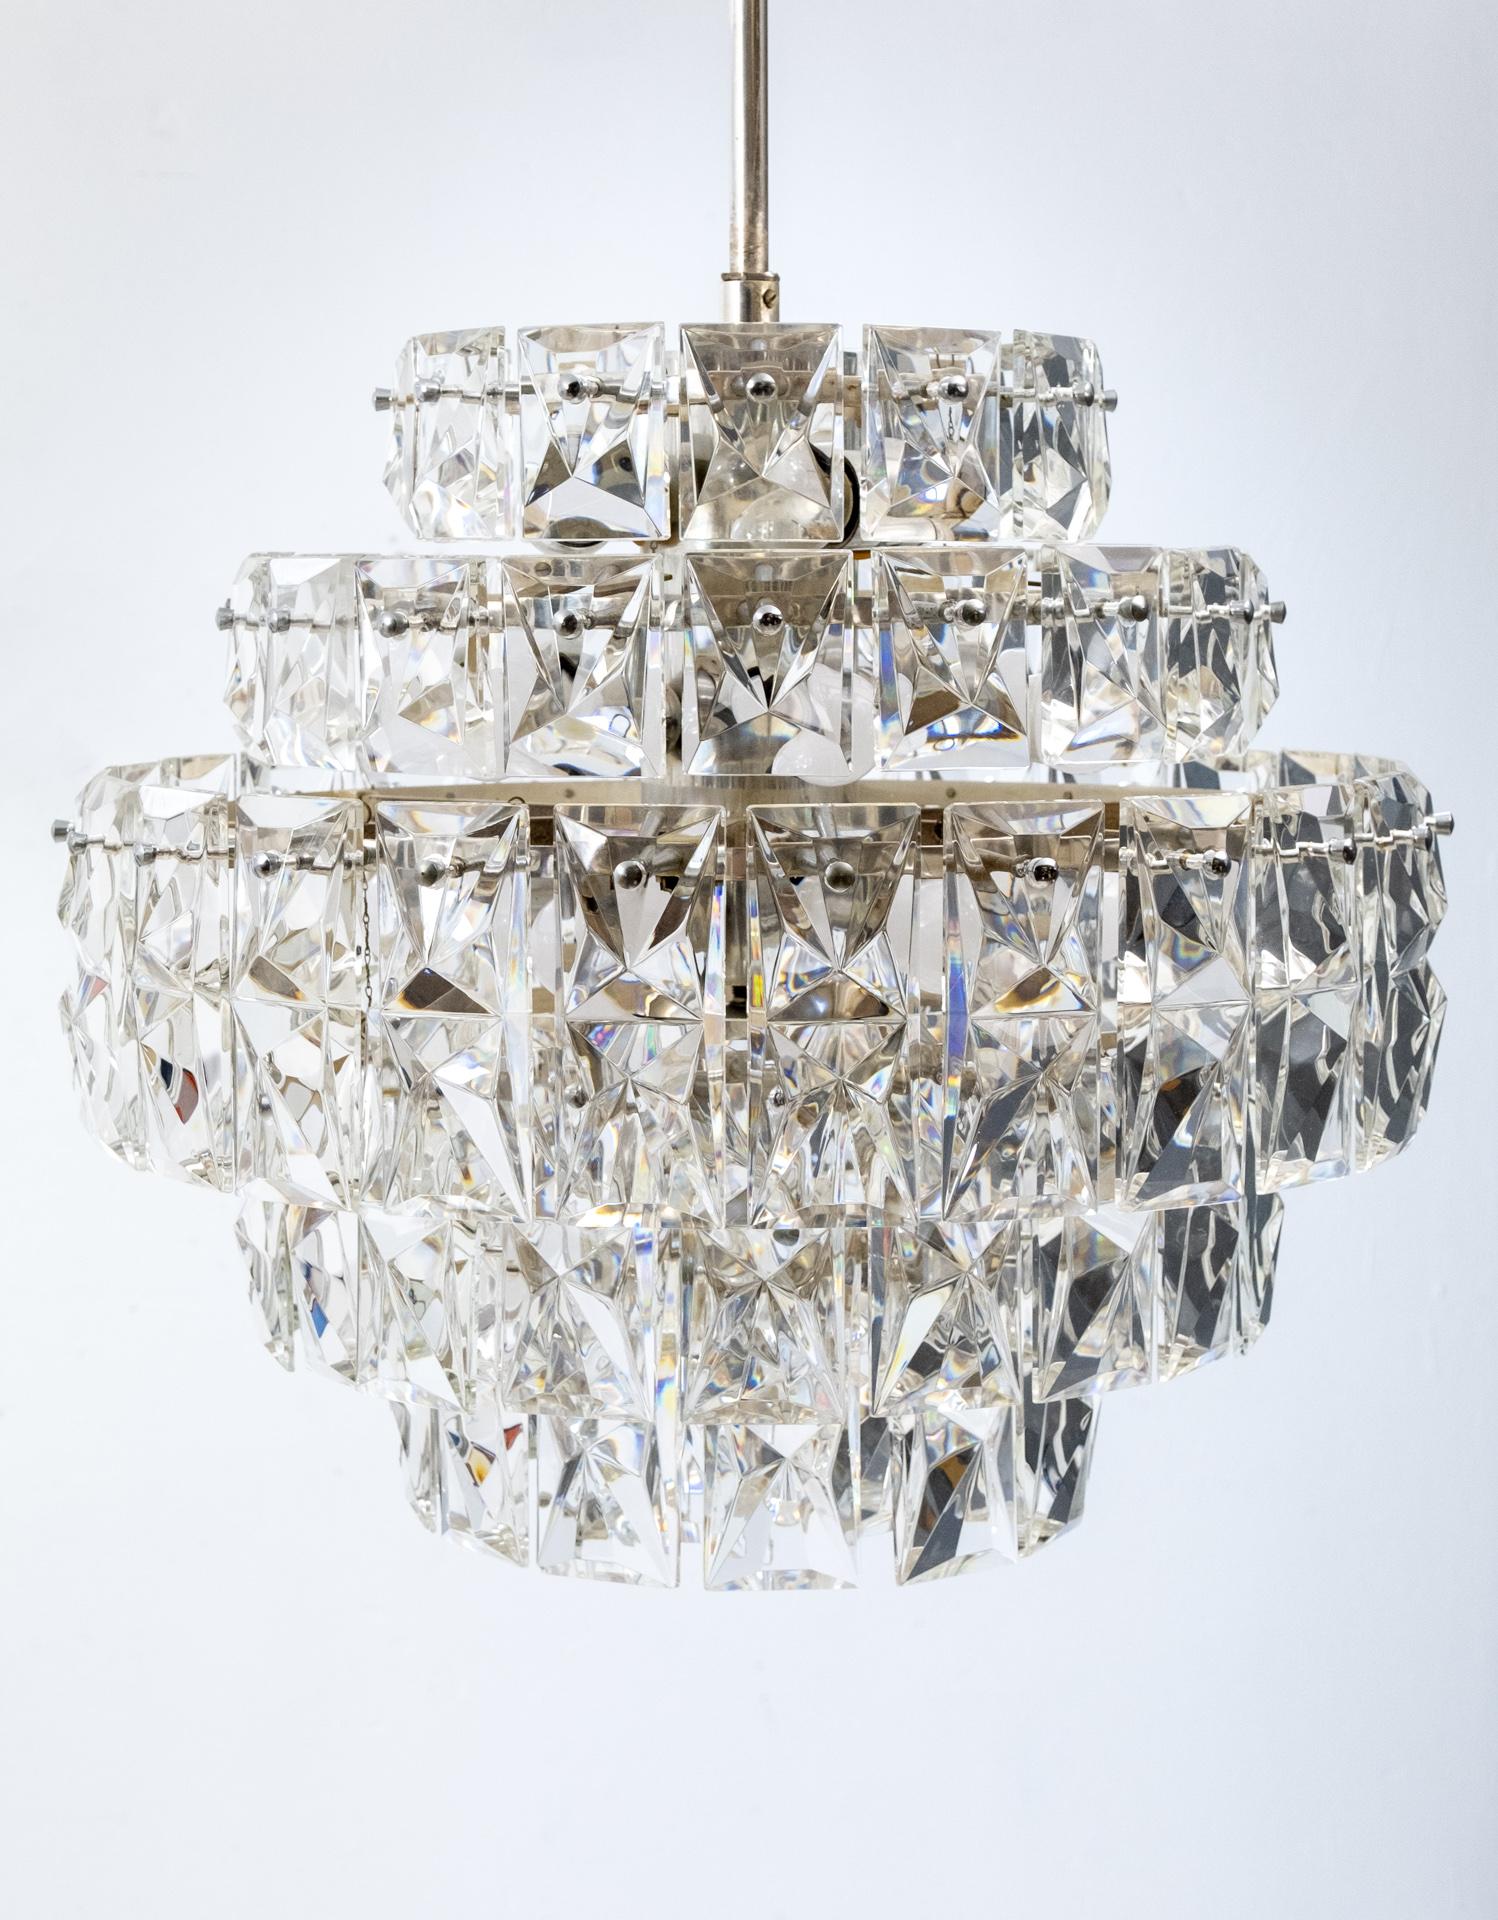 Very impressive 6 tiered Chrystal chandelier by Kinkeldey Germany a prestigious manufacturer of lighting 1970s. Chrome base comes with 100 faceted crystals. 16 E40 bulbs Led lamps can be used.
Art Deco style. Some of the crystals have chips.